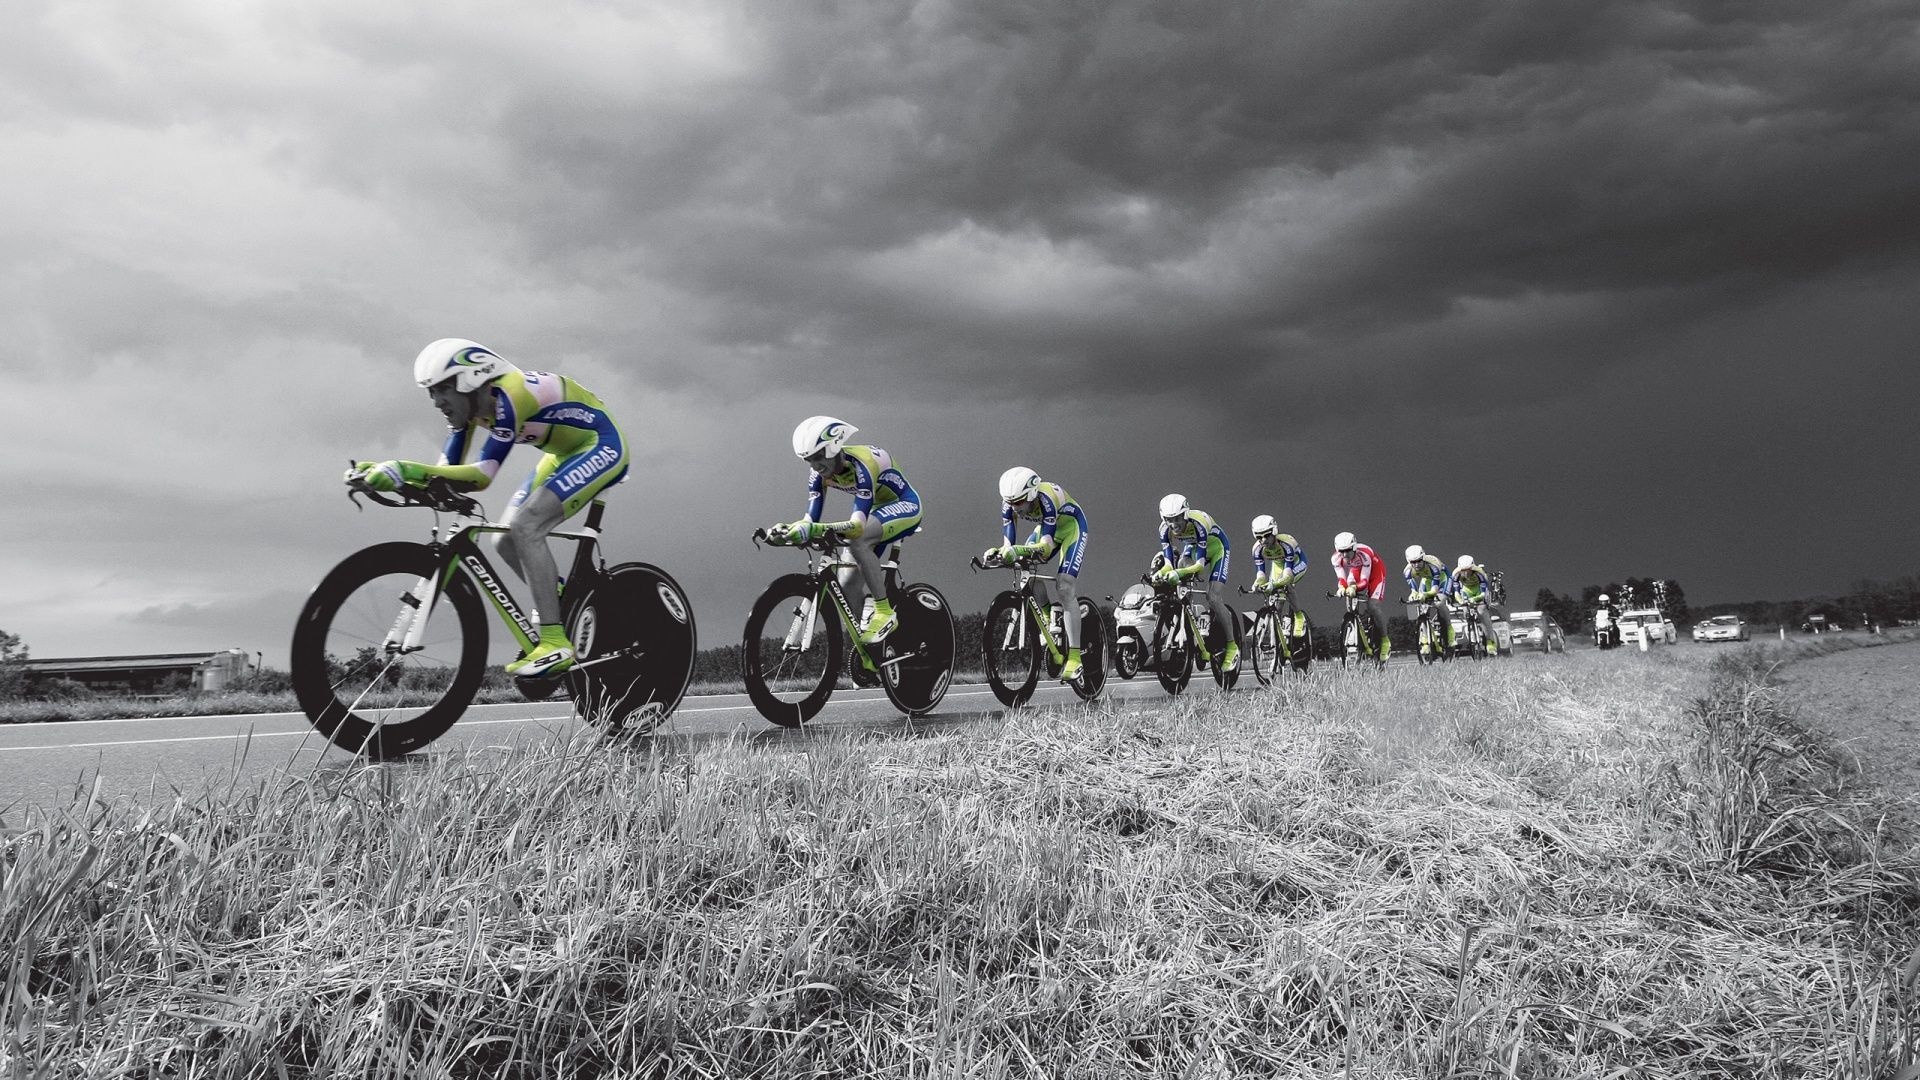 Cannondale Bikes, High-quality wallpapers, Top-notch performance, Sports enthusiasts' choice, 1920x1080 Full HD Desktop